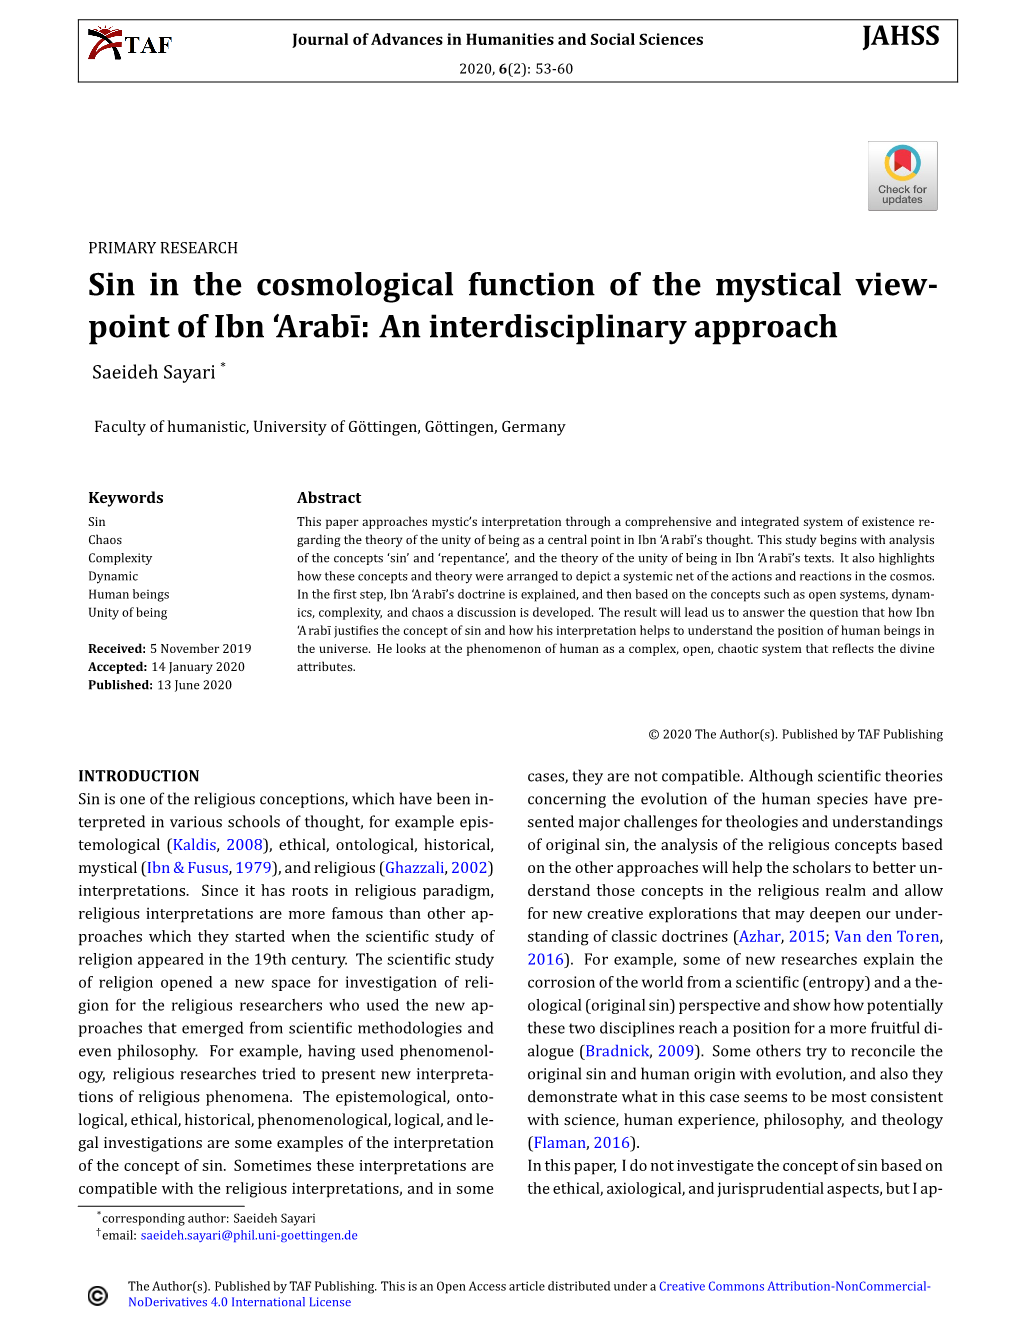 Sin in the Cosmological Function of the Mystical View- Point of Ibn 'Arabī: An